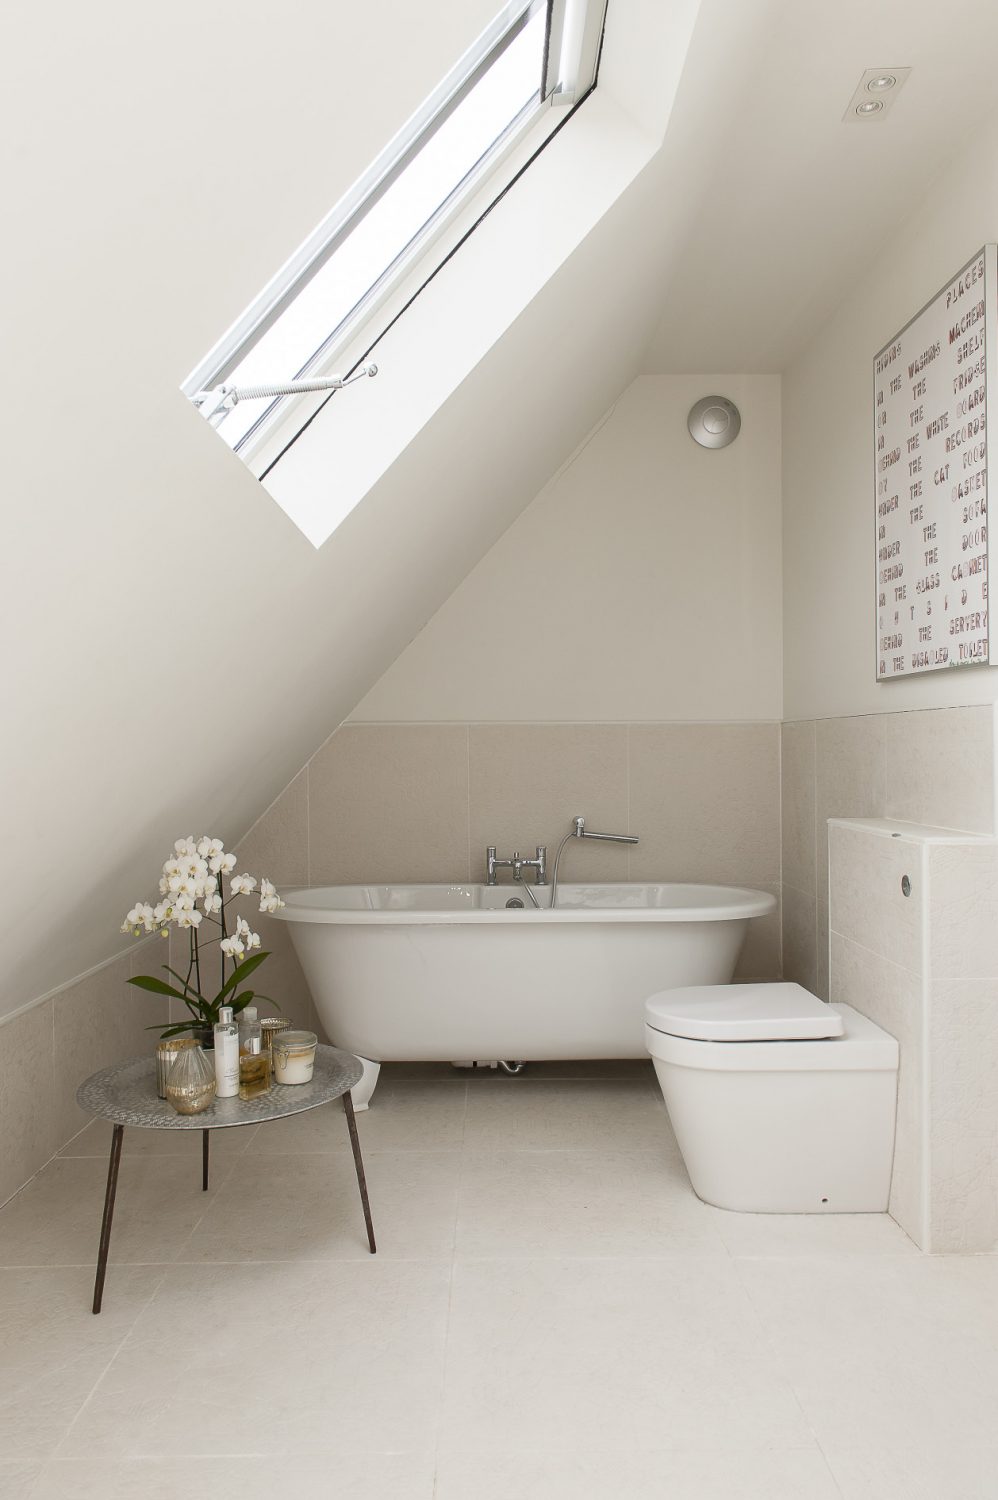 A family bathroom neatly slots into a space under the sloping roof upstairs